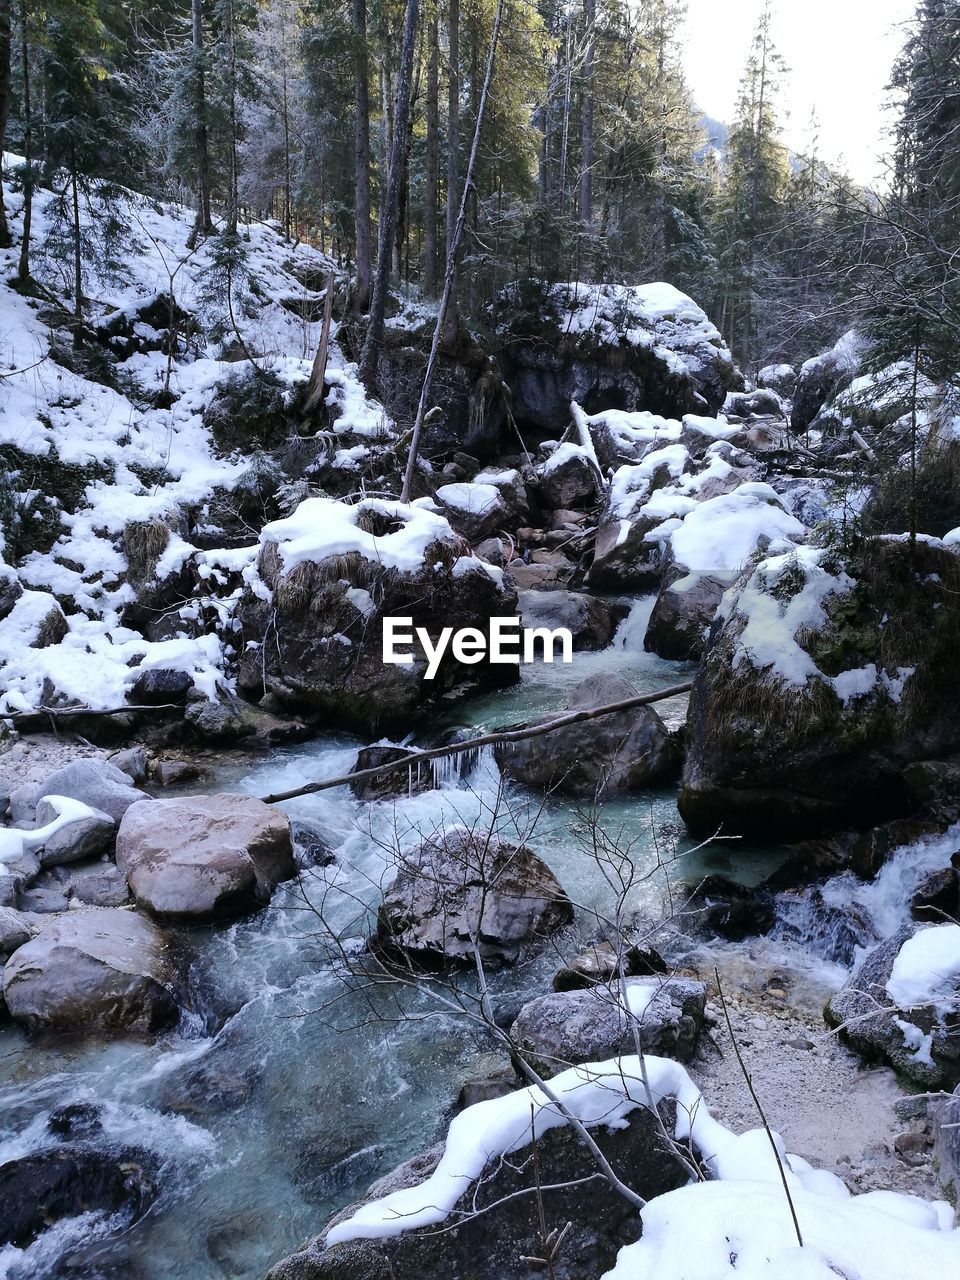 FROZEN RIVER AMIDST TREES IN FOREST